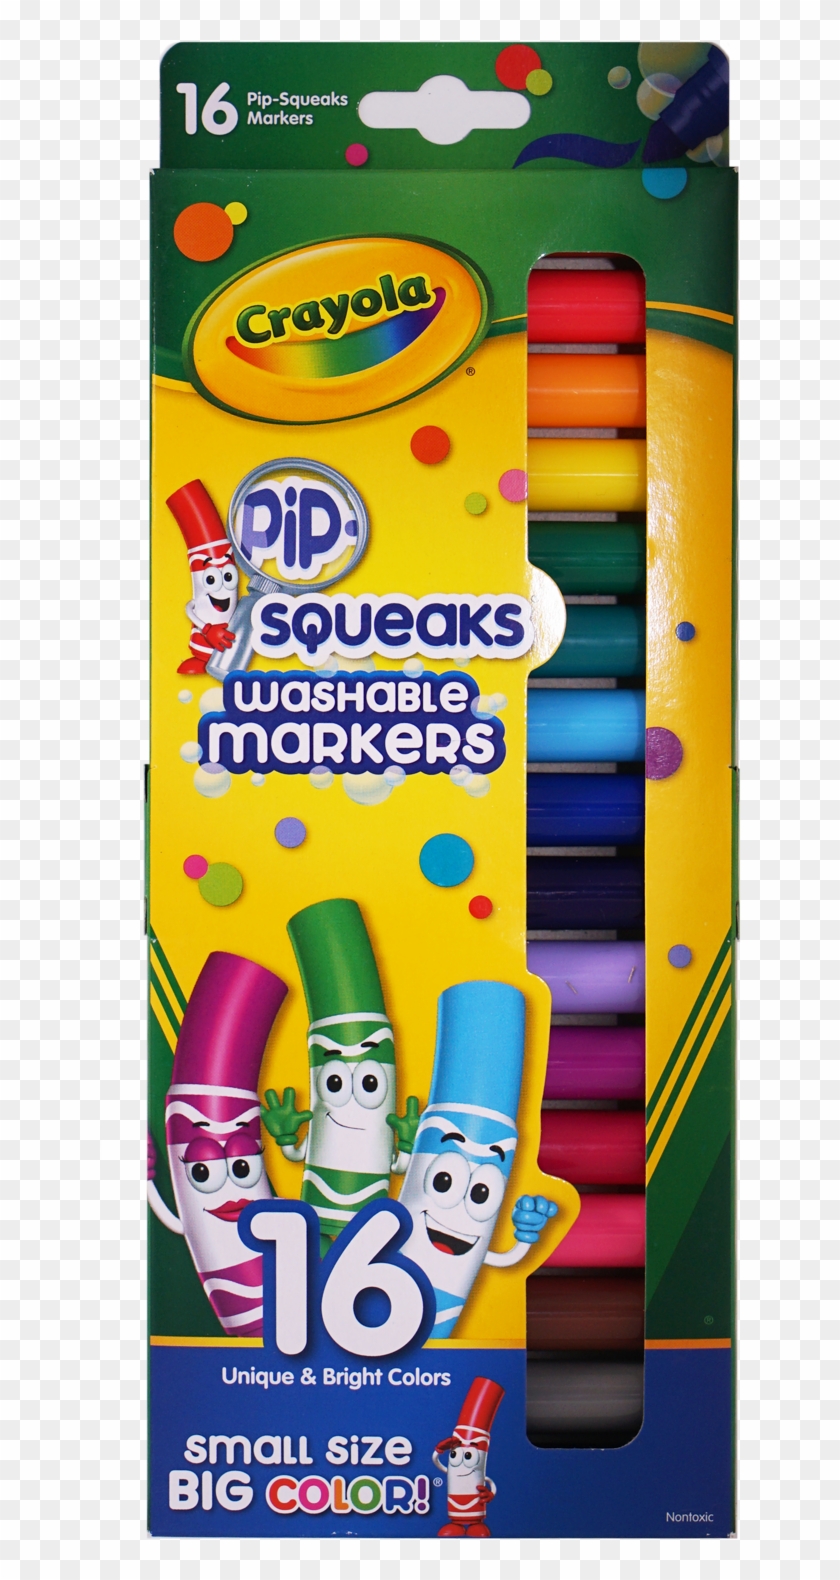 Crayola Pip-squeaks Washable Markers - Pip Squeak Markers Clipart #3969975